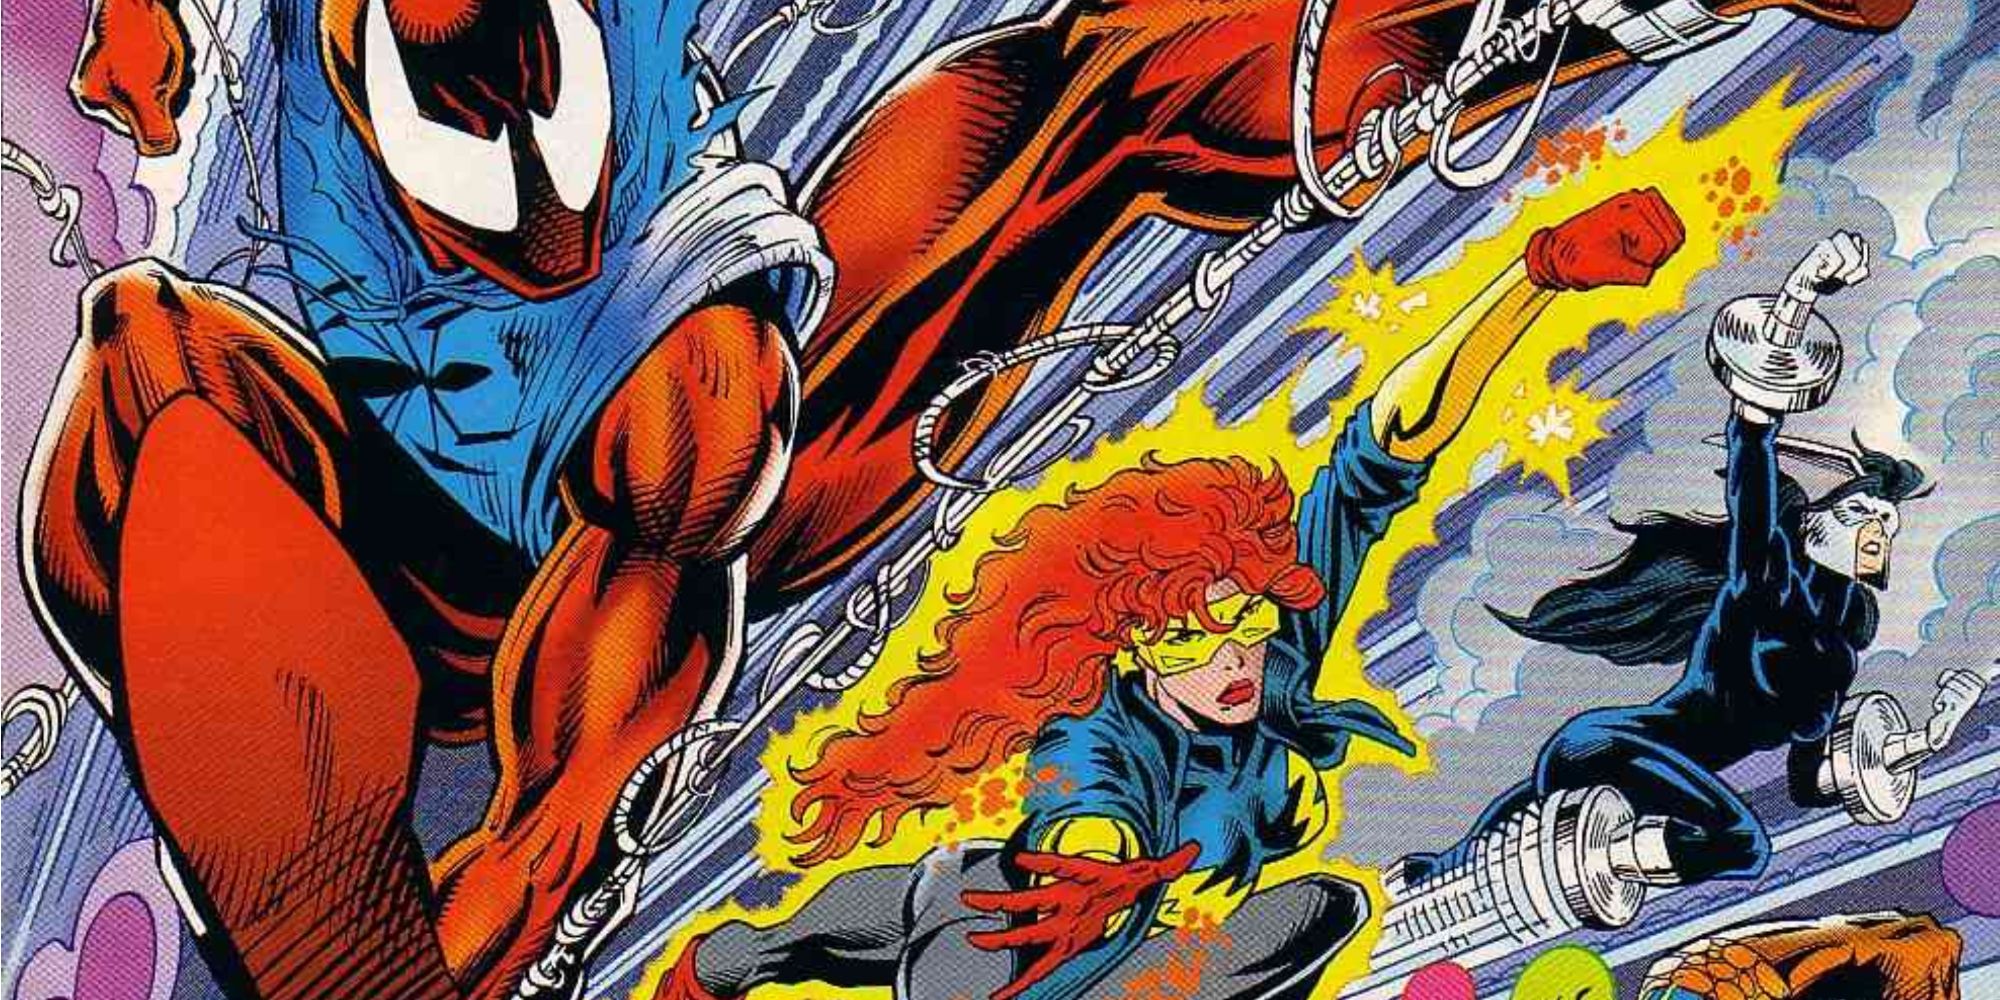 The Scarlet Spider and Firestar fly into battle in Marvel Comics.